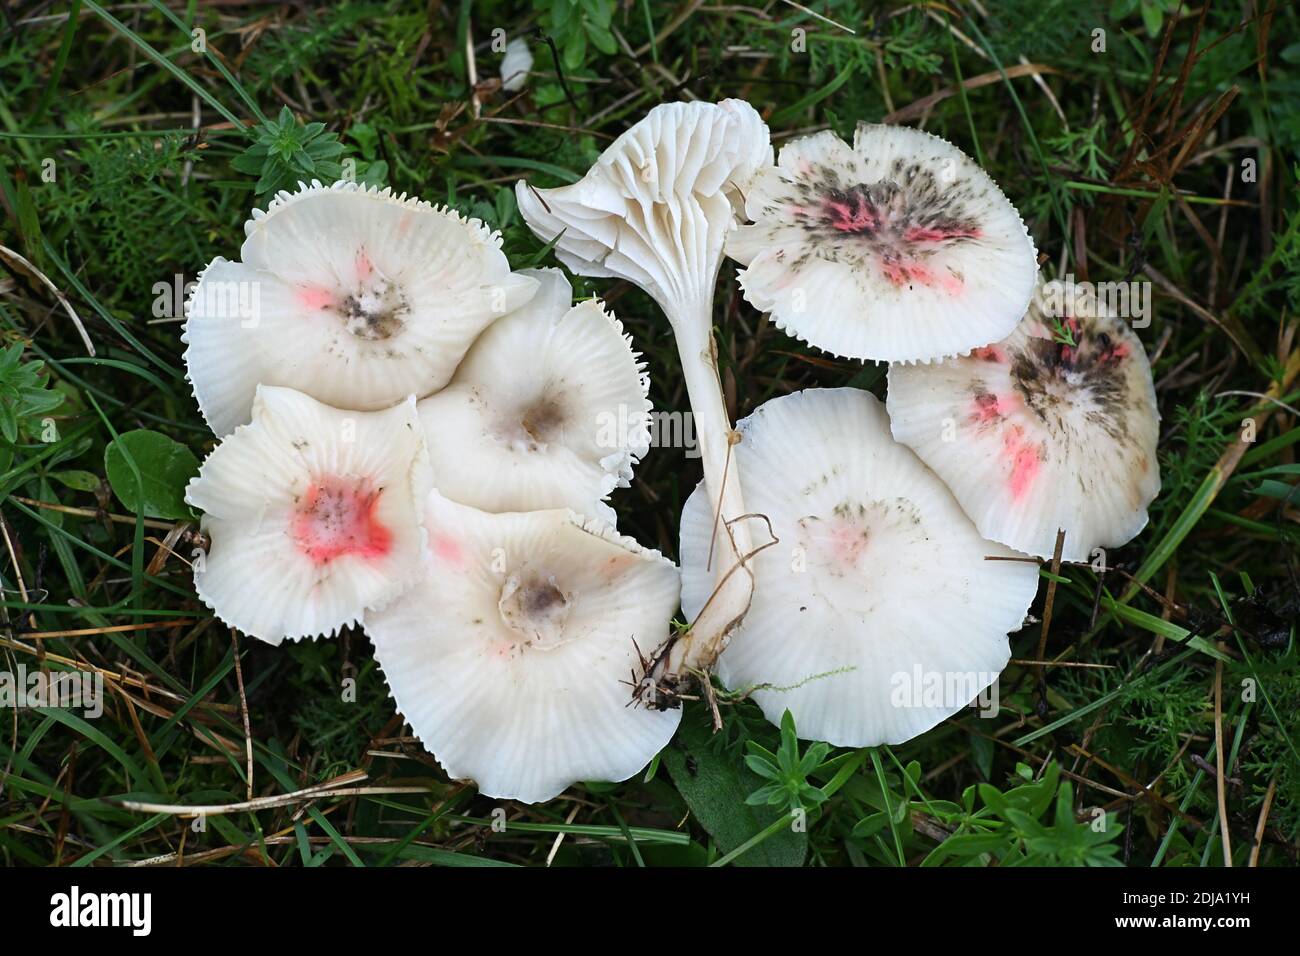 Cuphophyllus virgineus f. roseipes, known as the snowy waxcap, wild mushroom from Finland Stock Photo